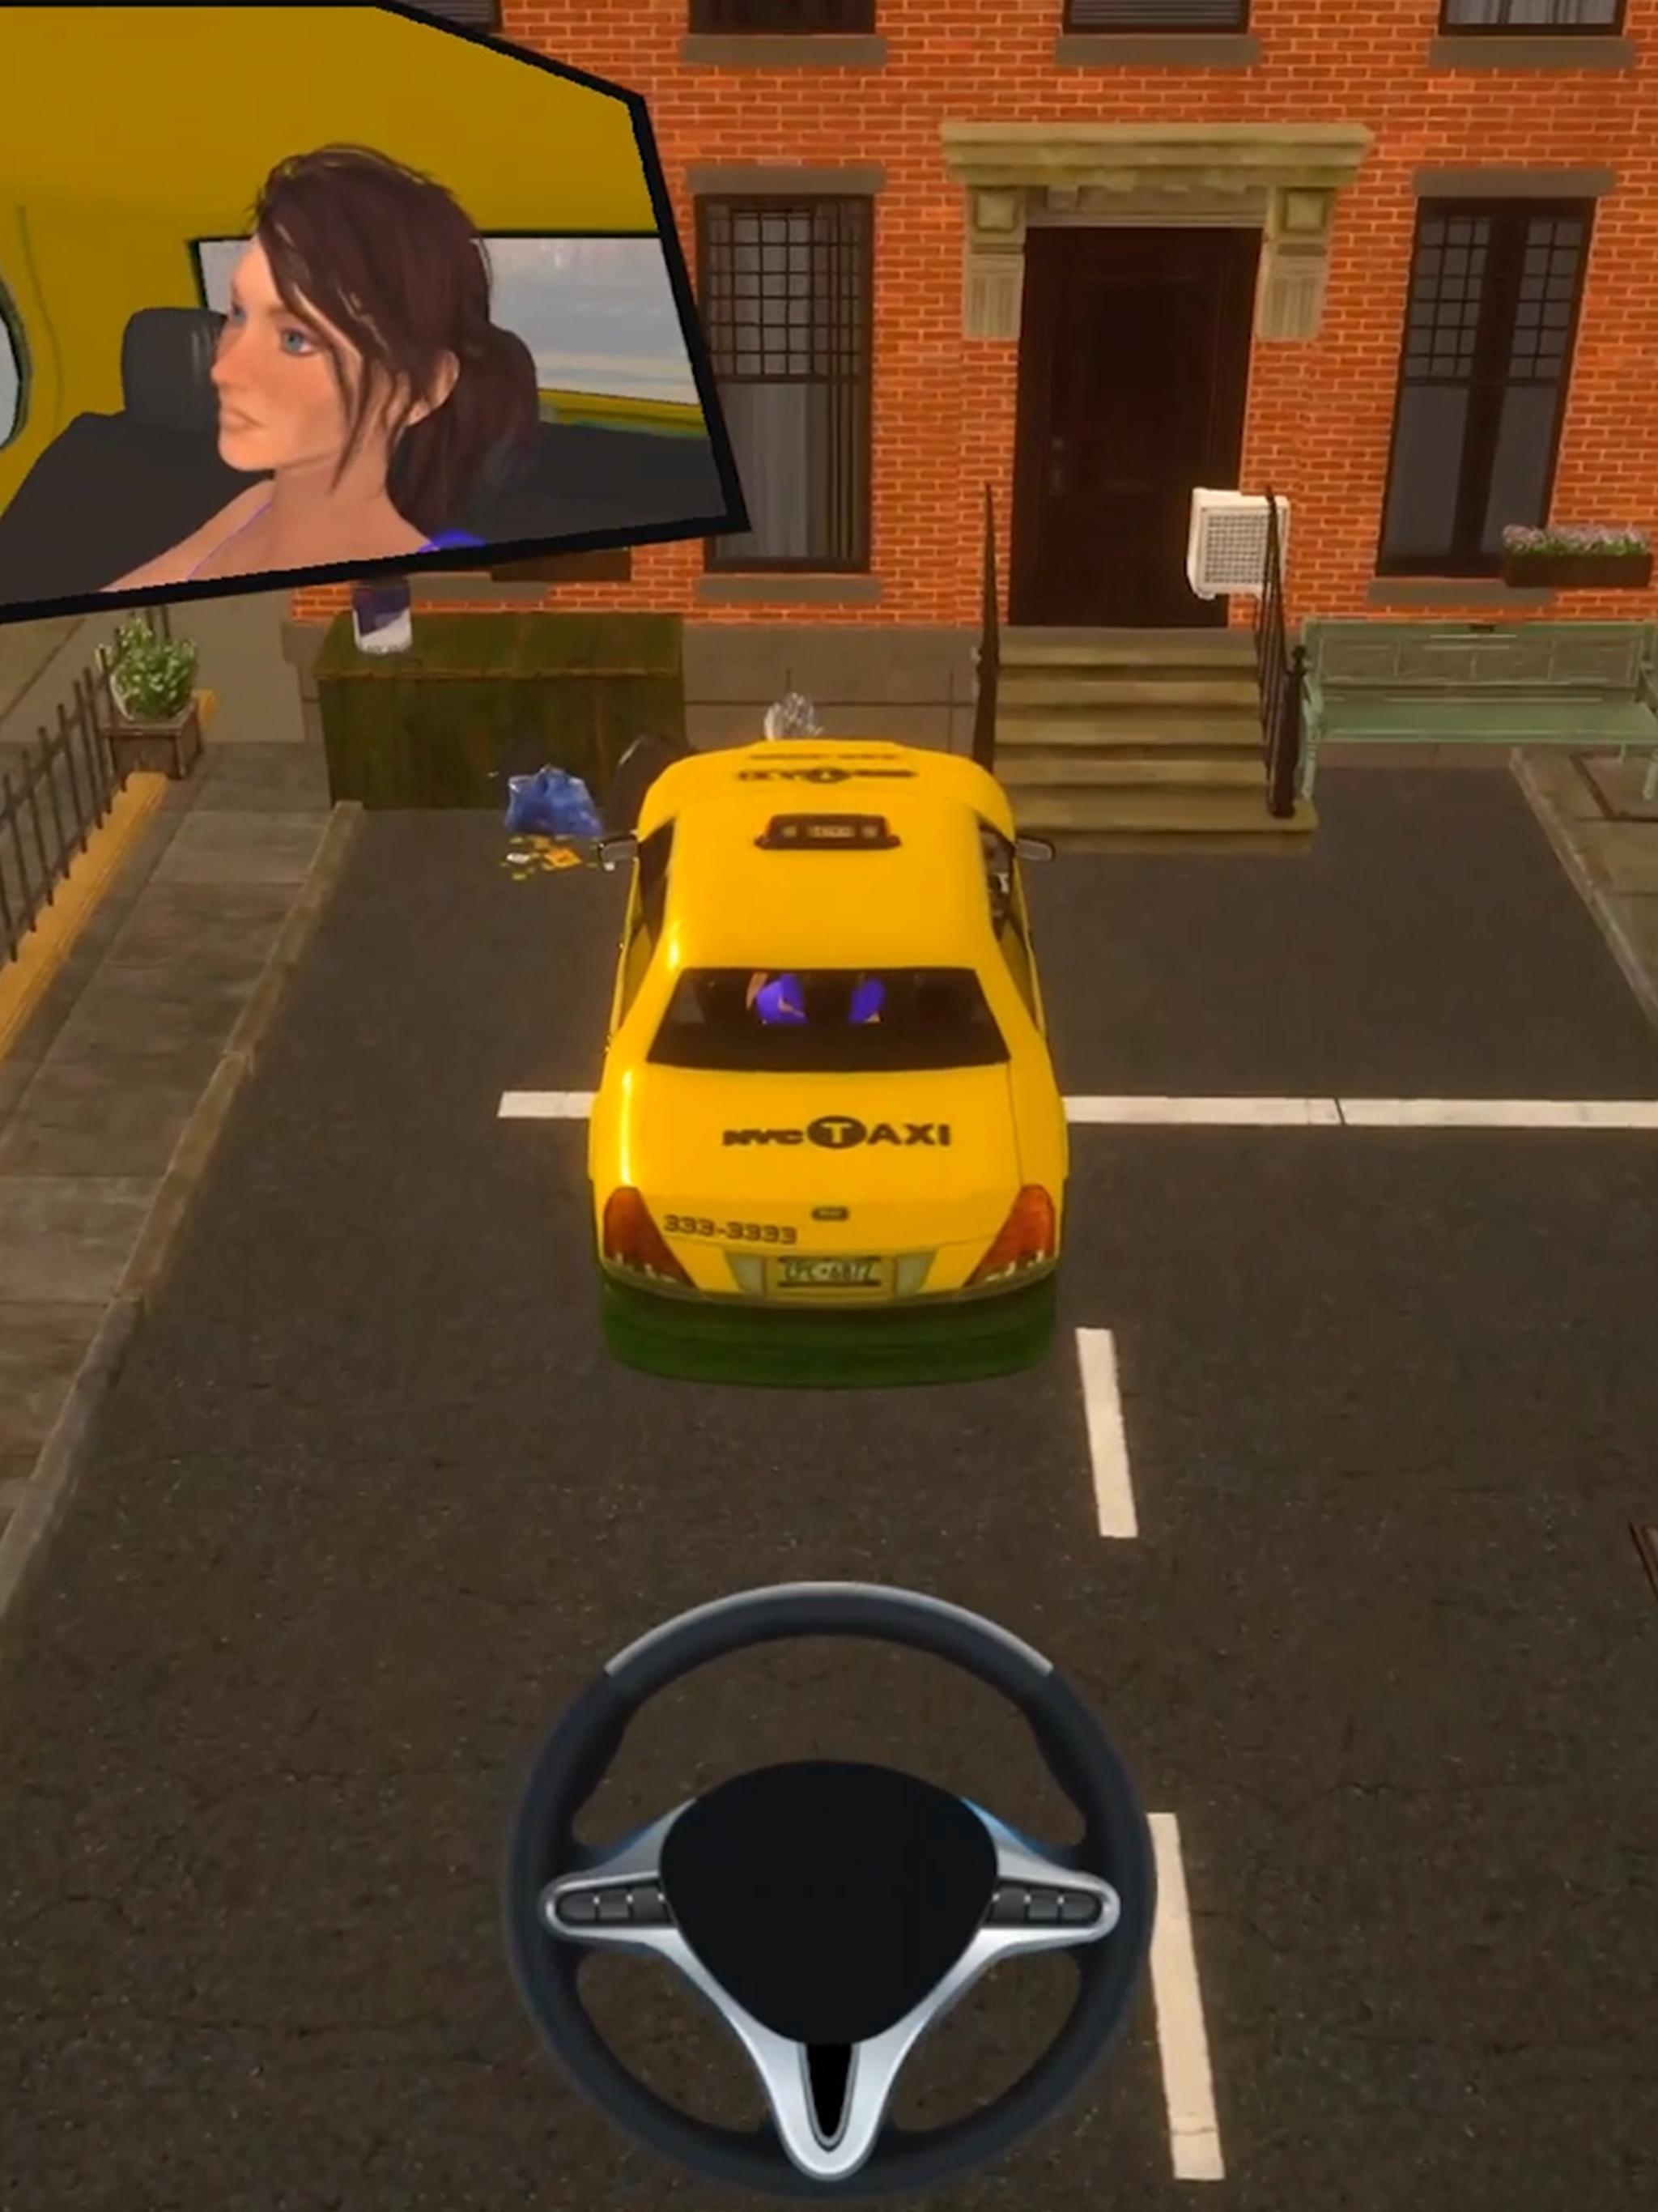 Taxi life моды. Такси лайф. Taxi Life a City Driving Simulator карта. Taxi Life Xbox Series. Loader in Taxi app.